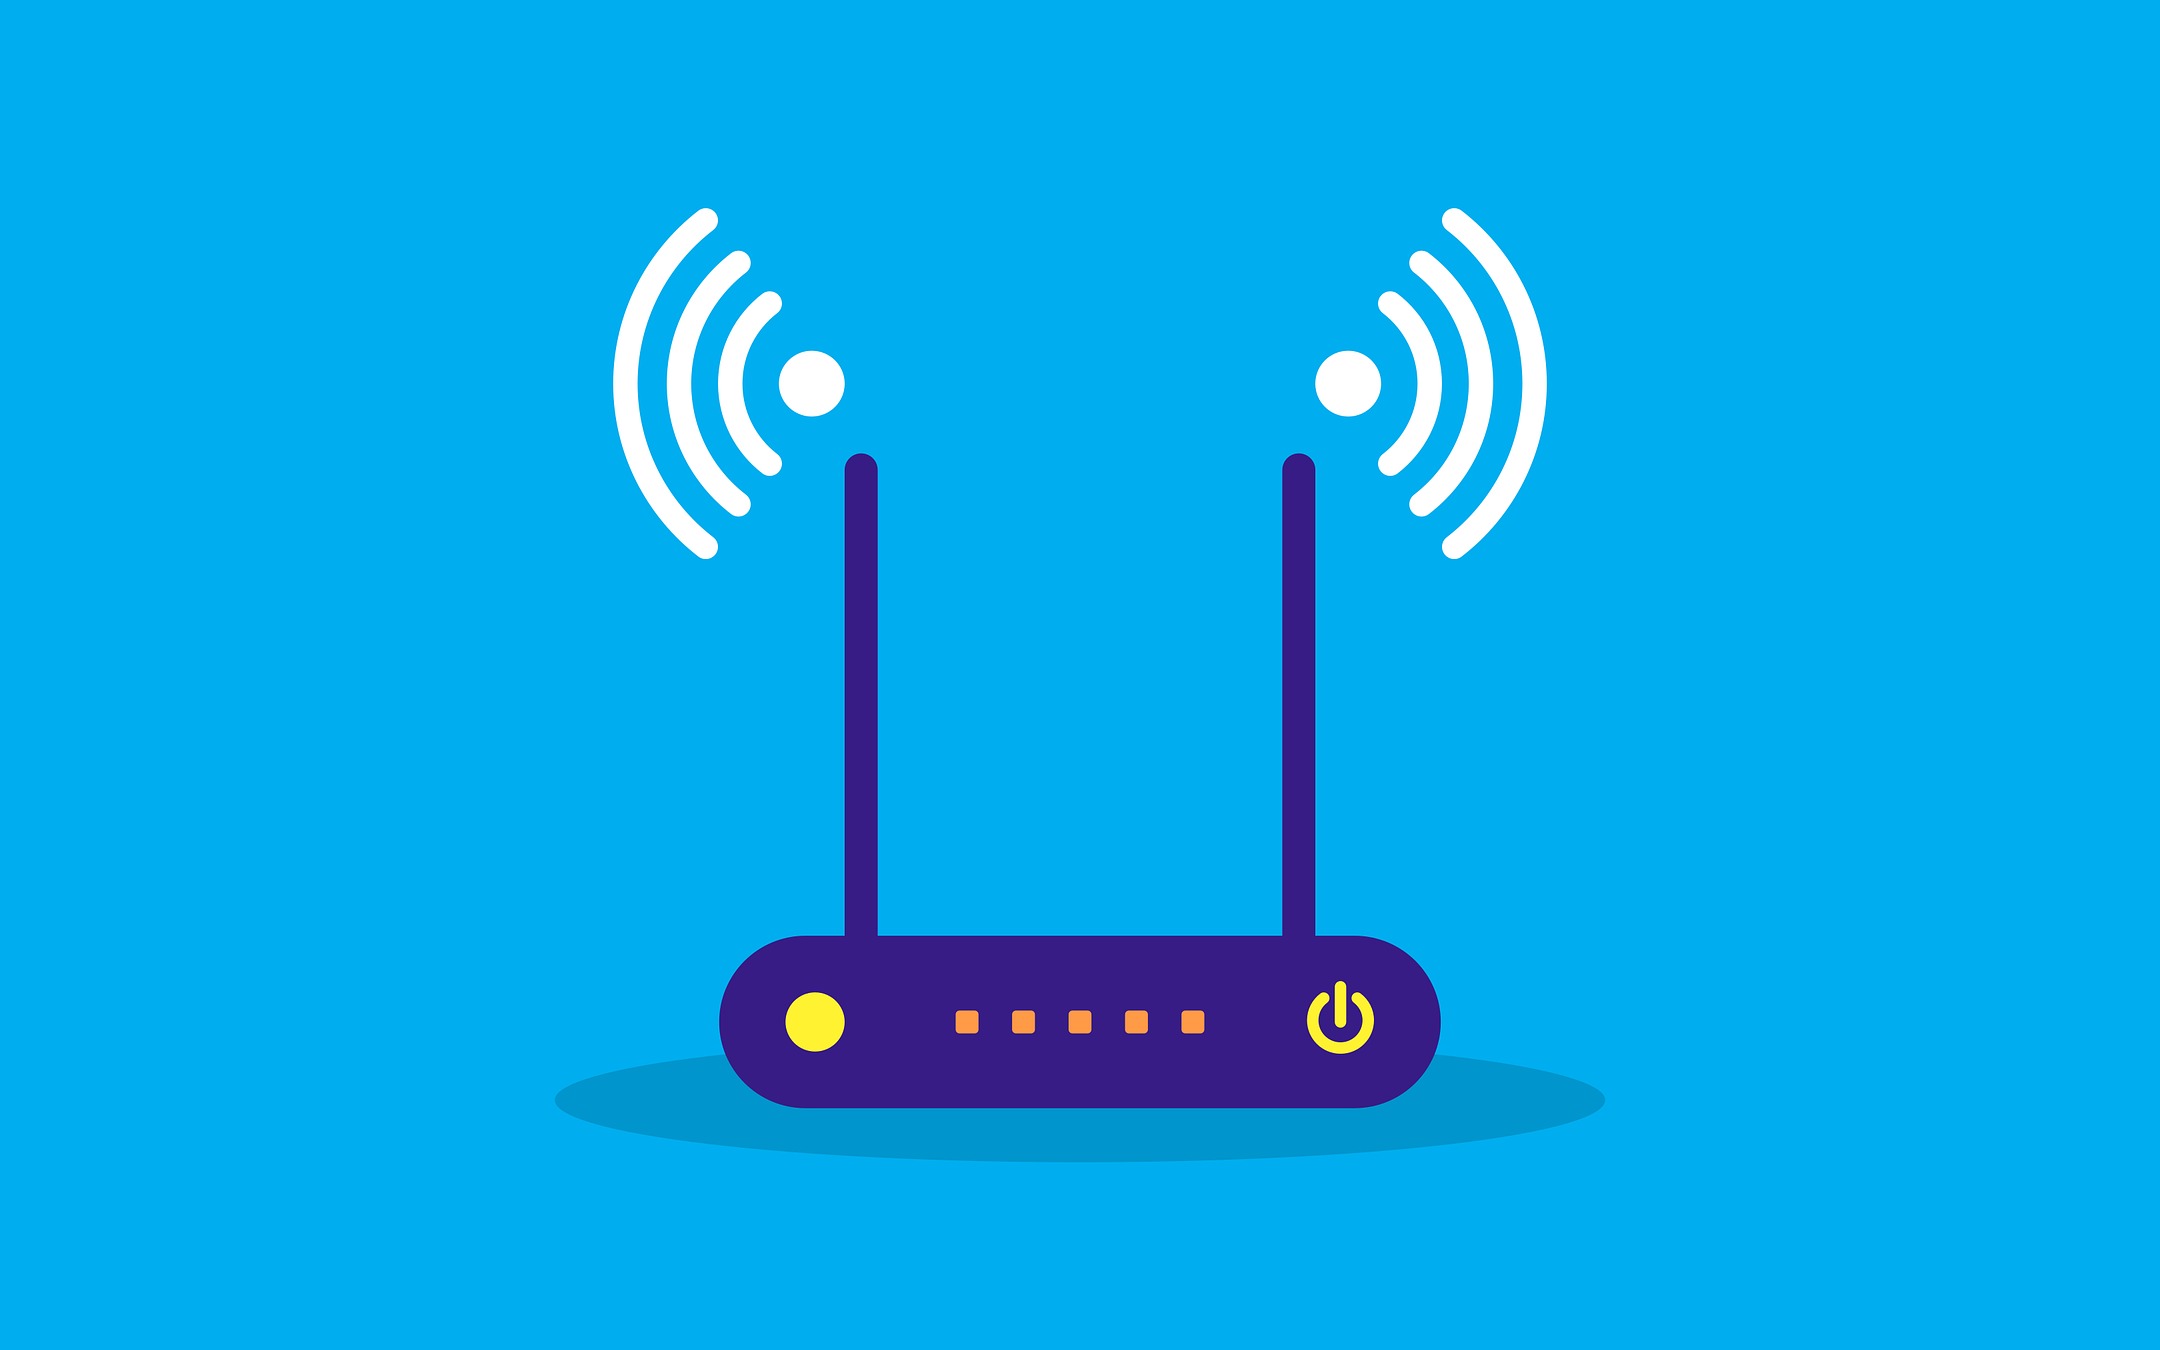 Malware discovered exploiting TP-Link routers for DDoS attacks